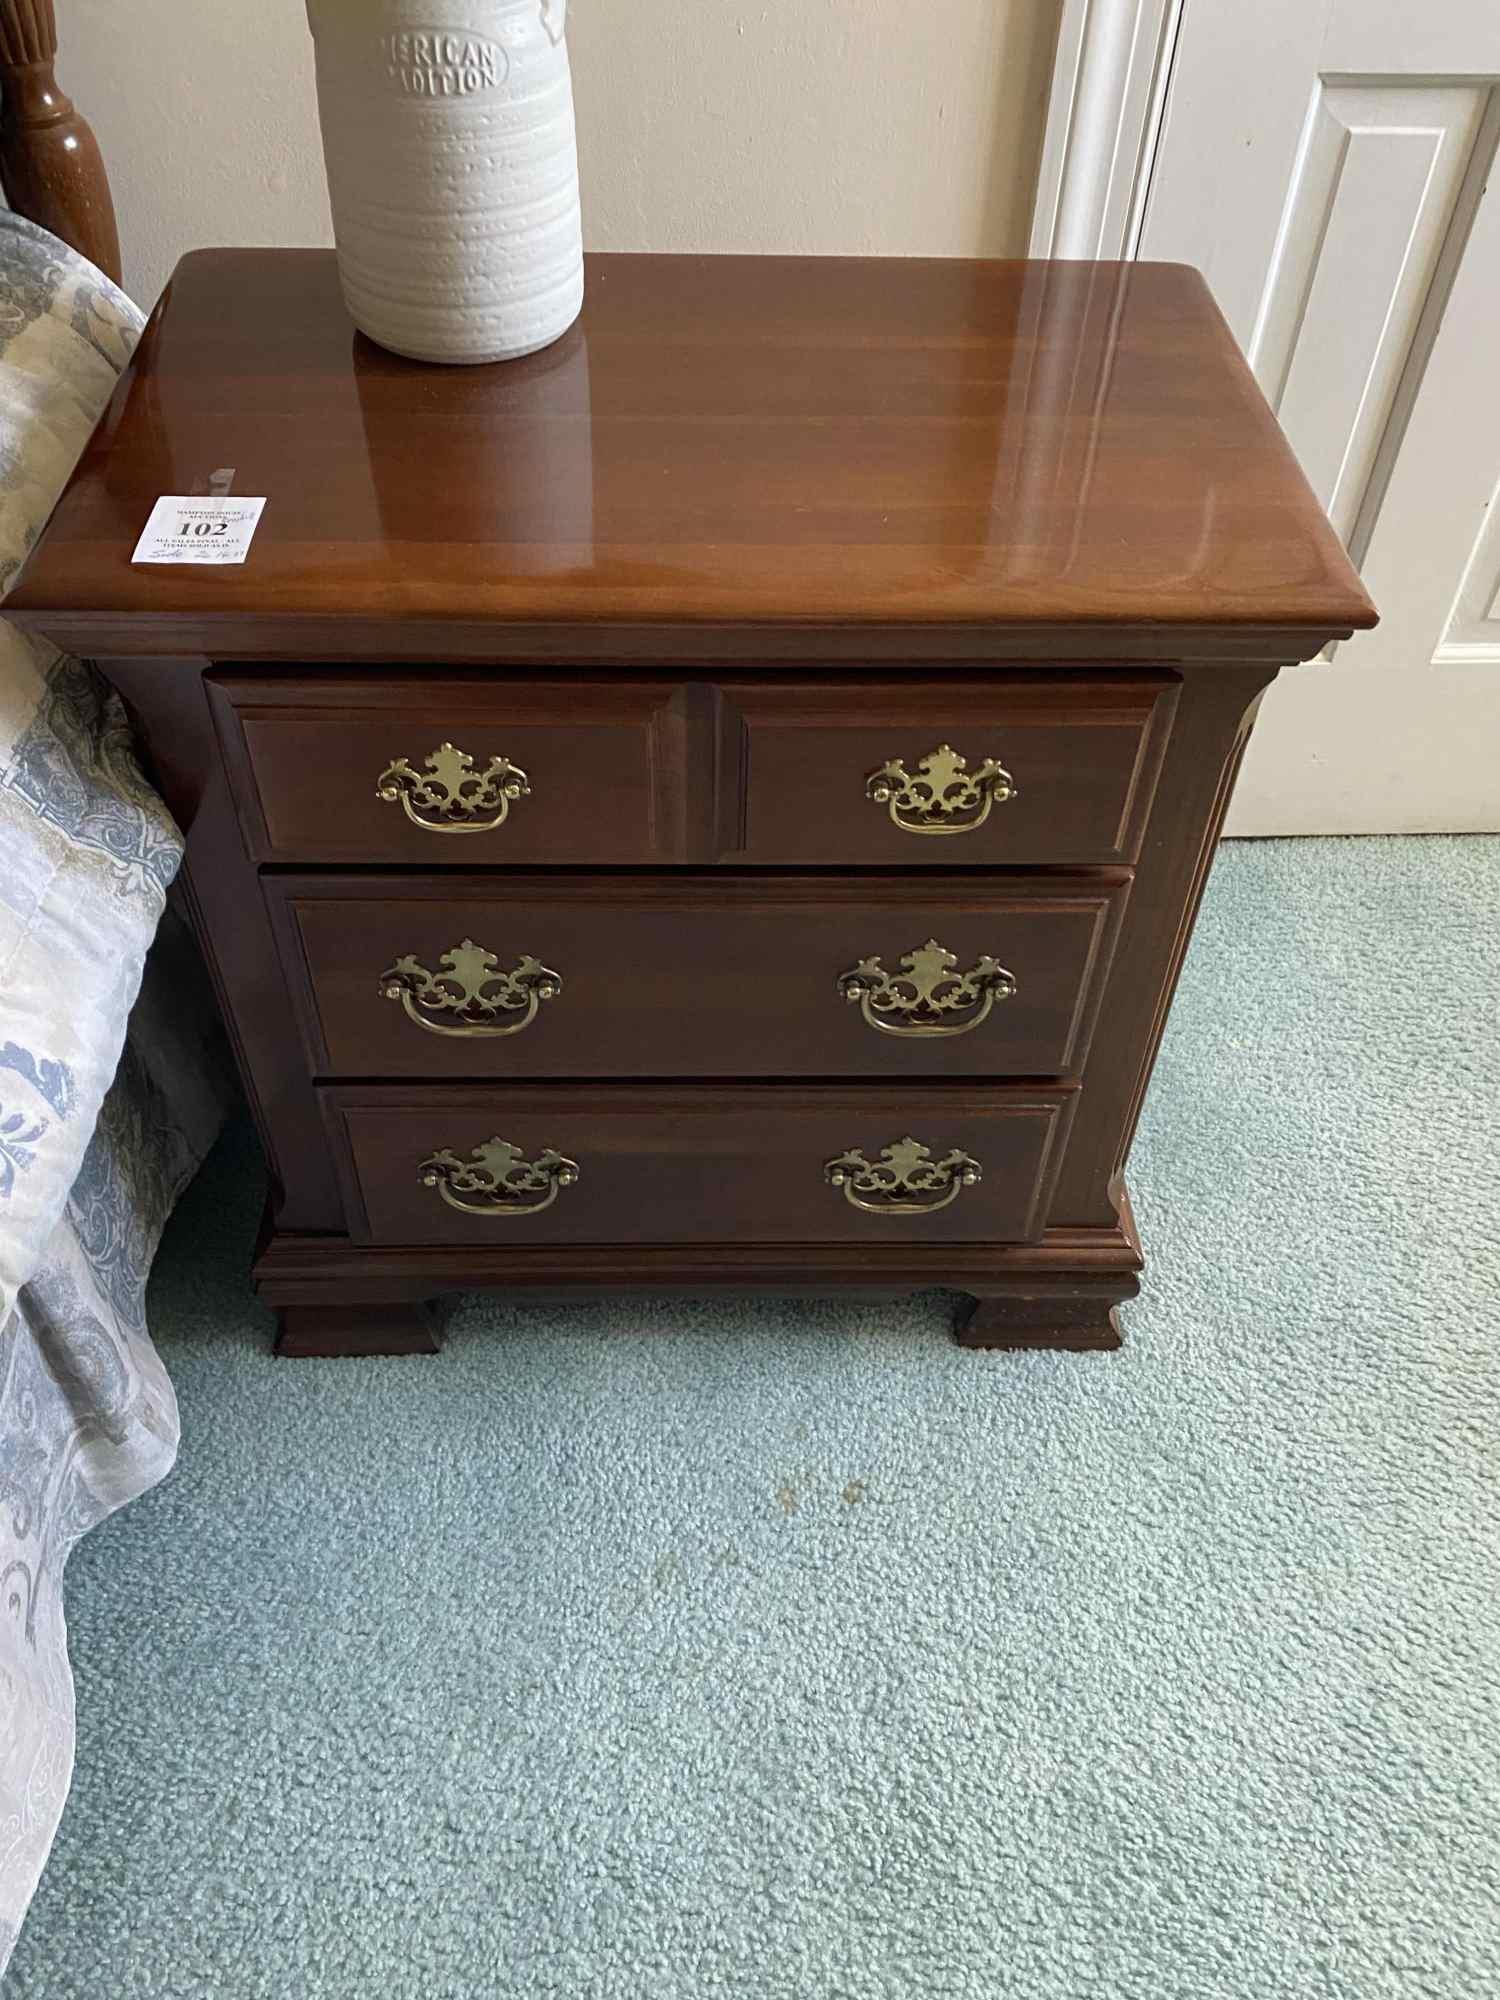 BROYHILL BEDSIDE TABLE WITH DRAWERS